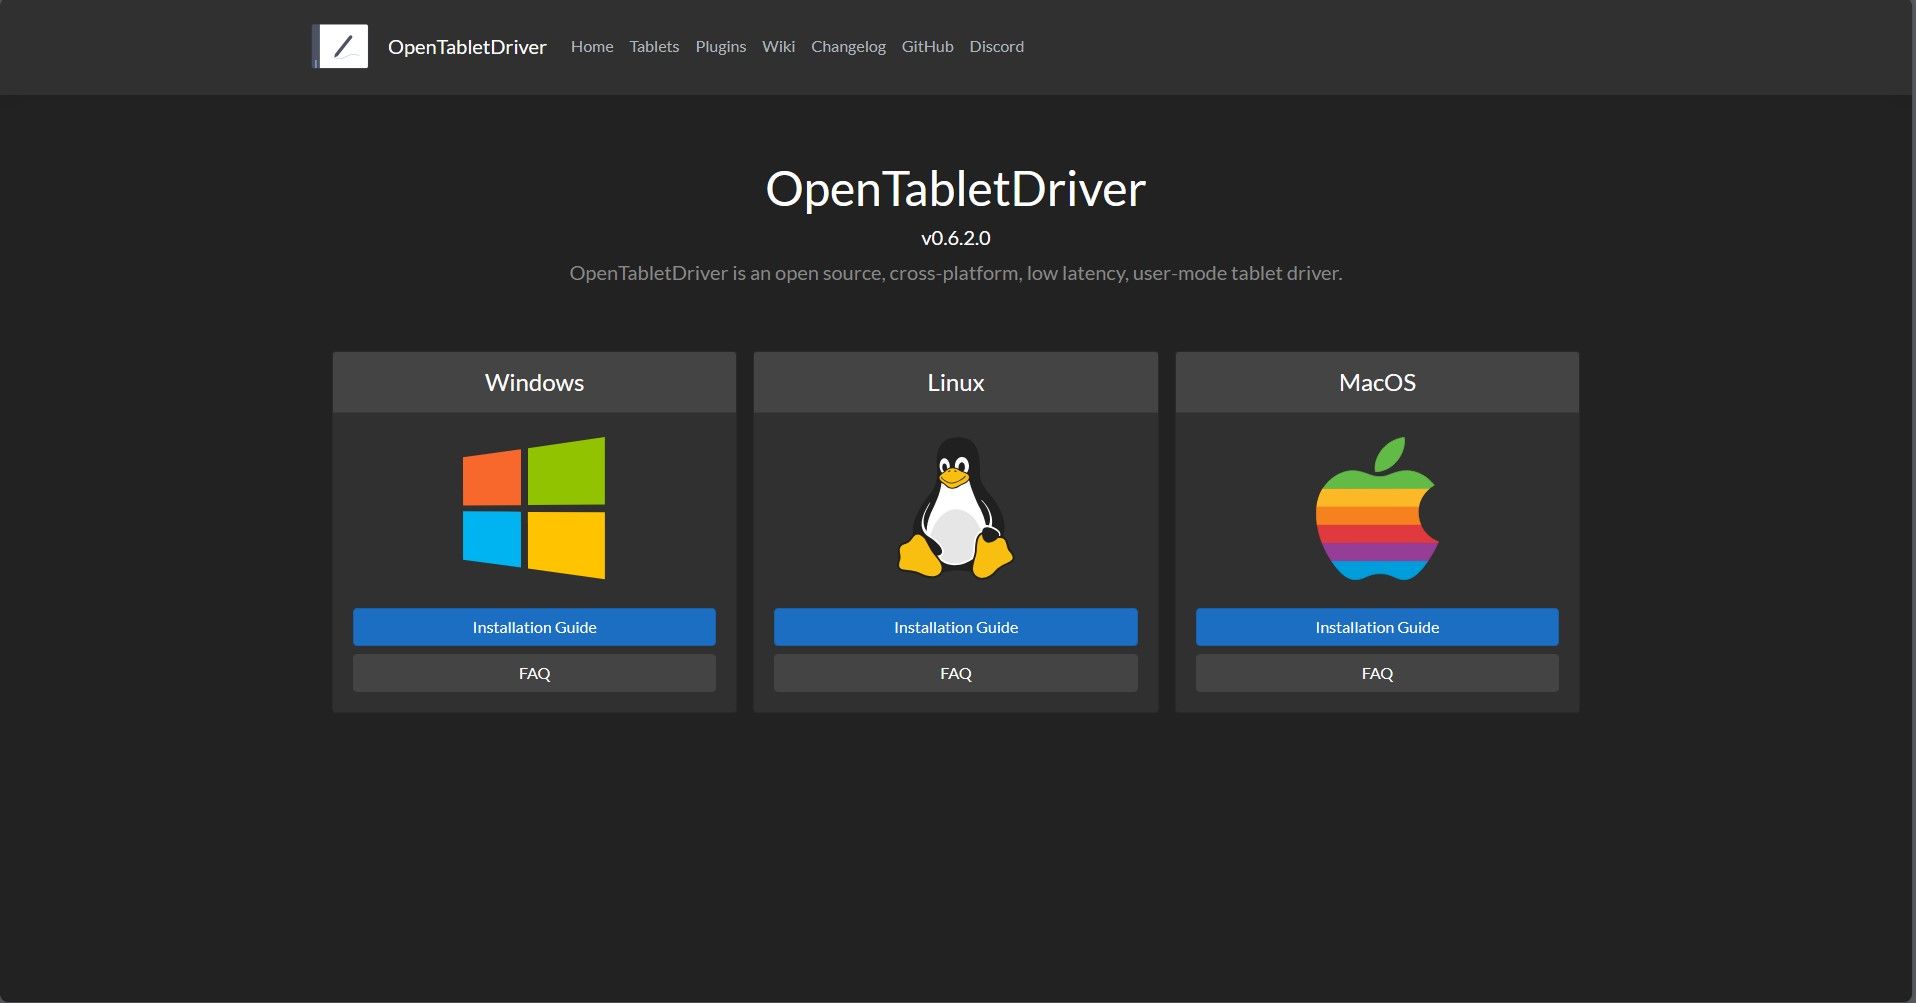 Open Tablet Driver Web Page